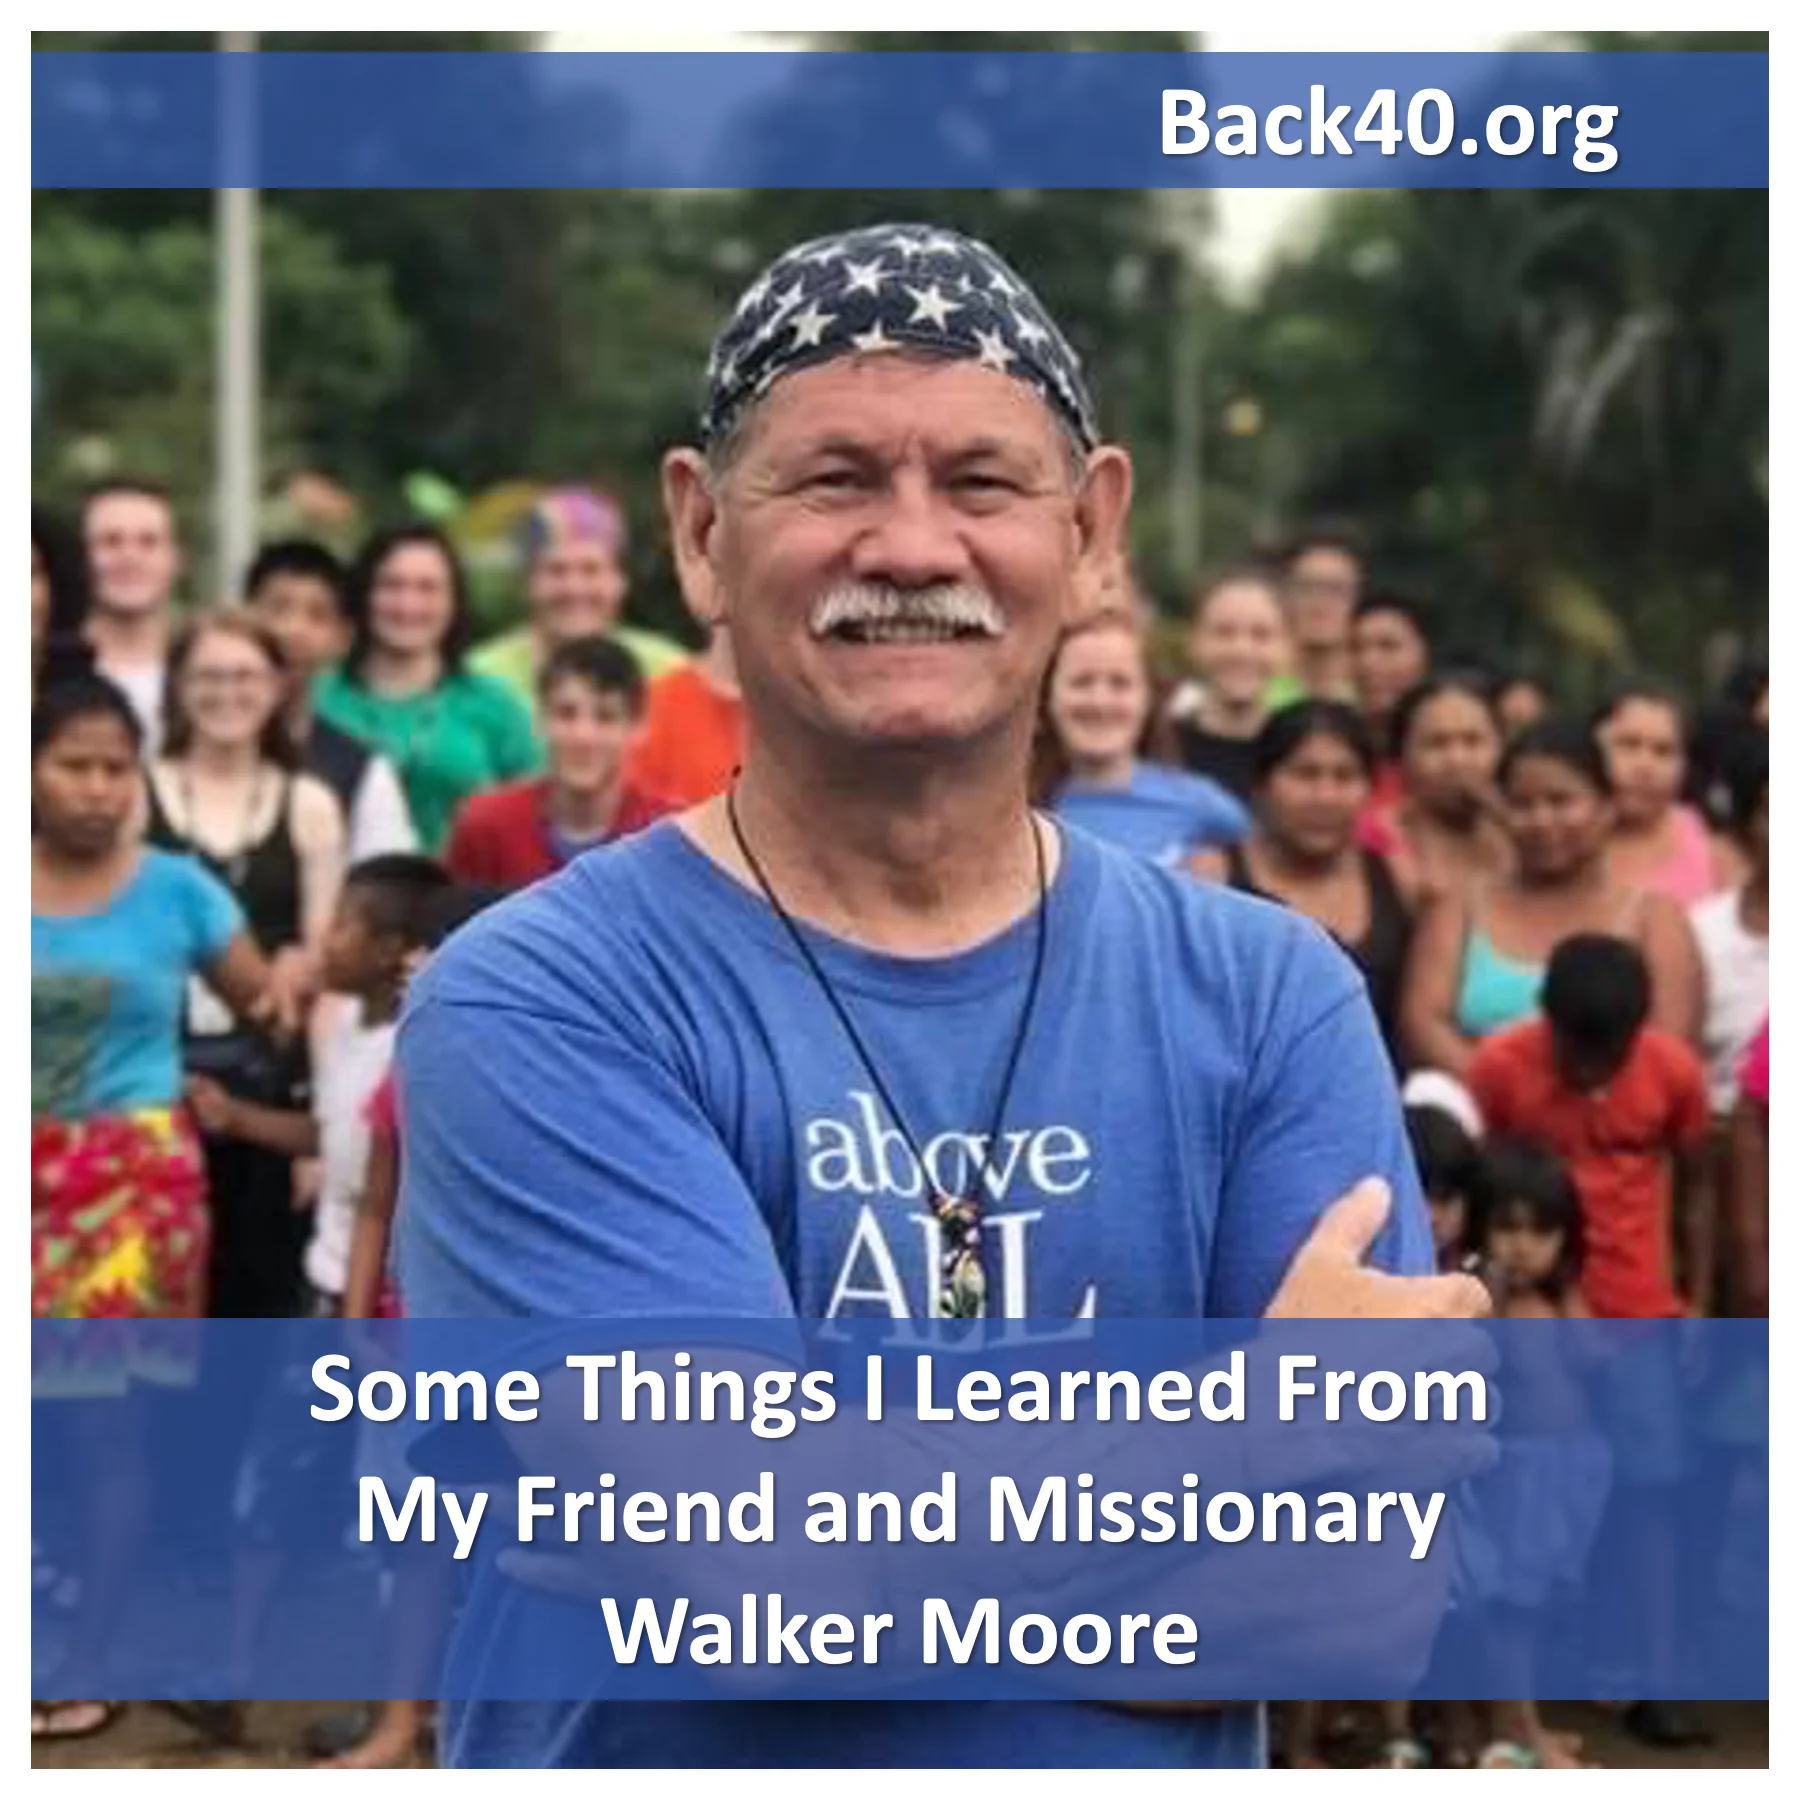 Some Things I Learned From Walker Moore